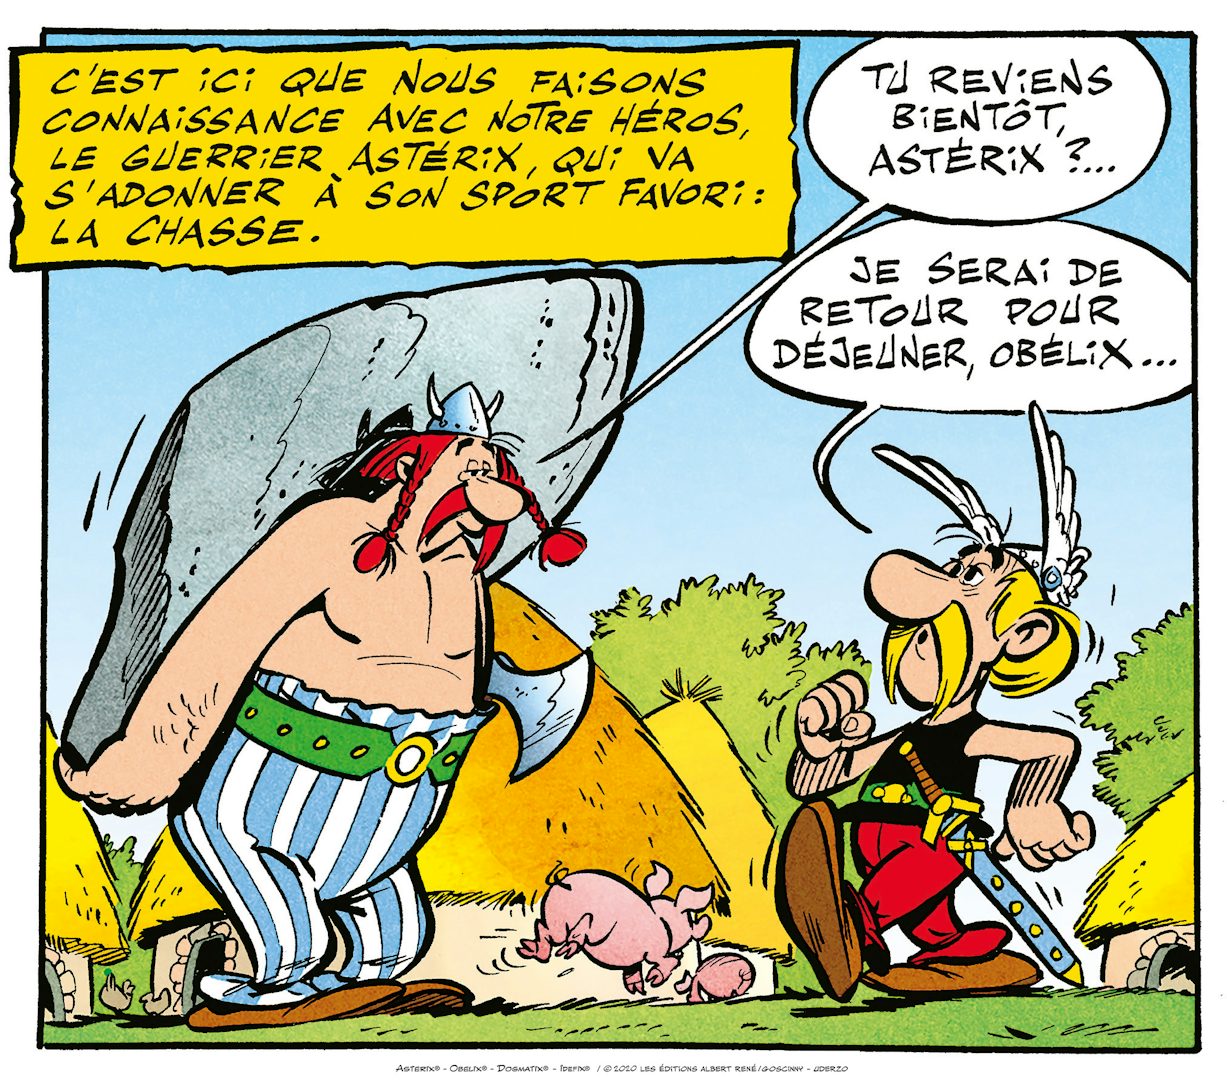 On the influence of Asterix